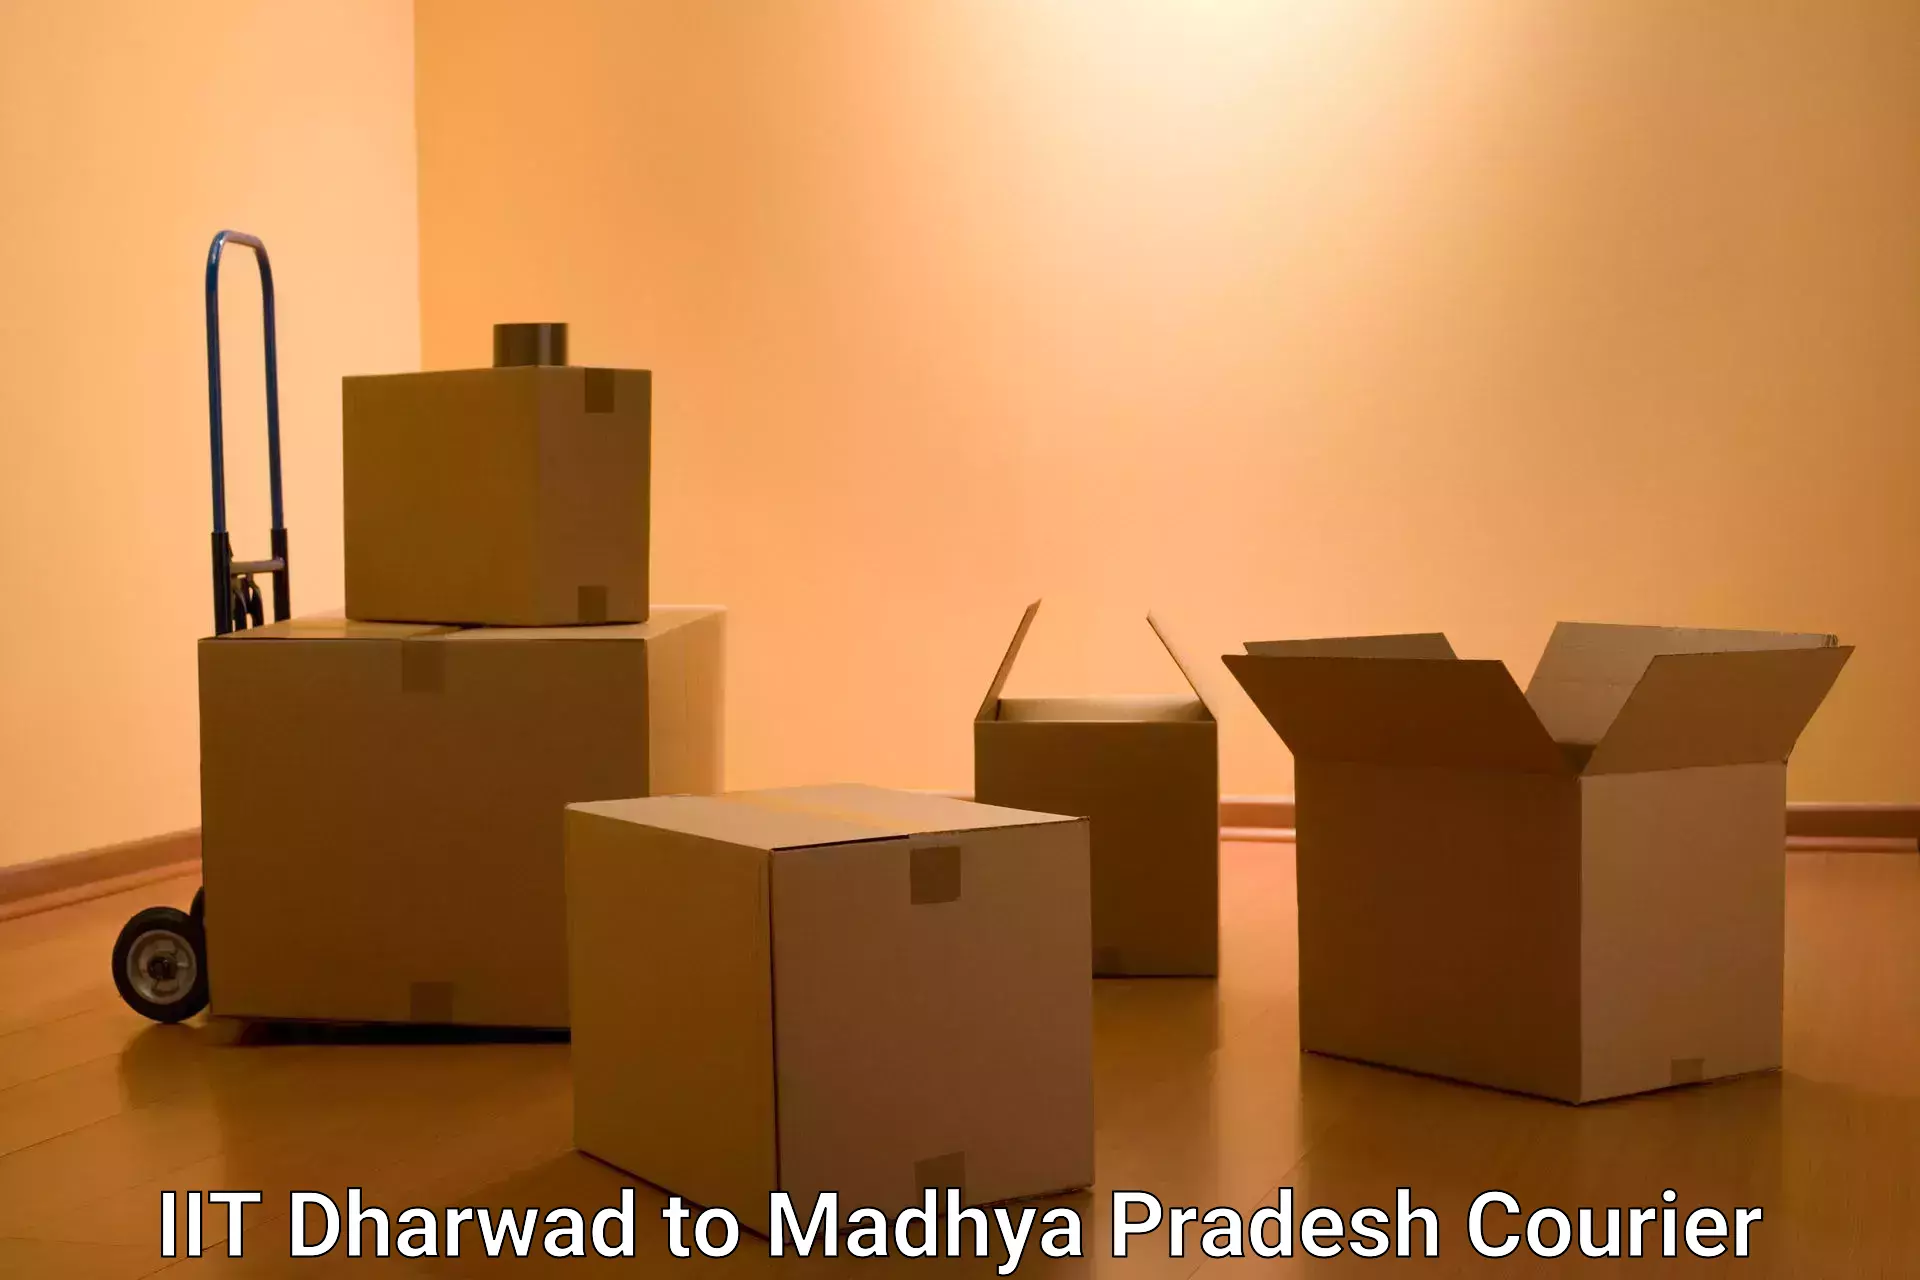 Subscription-based courier IIT Dharwad to West Nimar